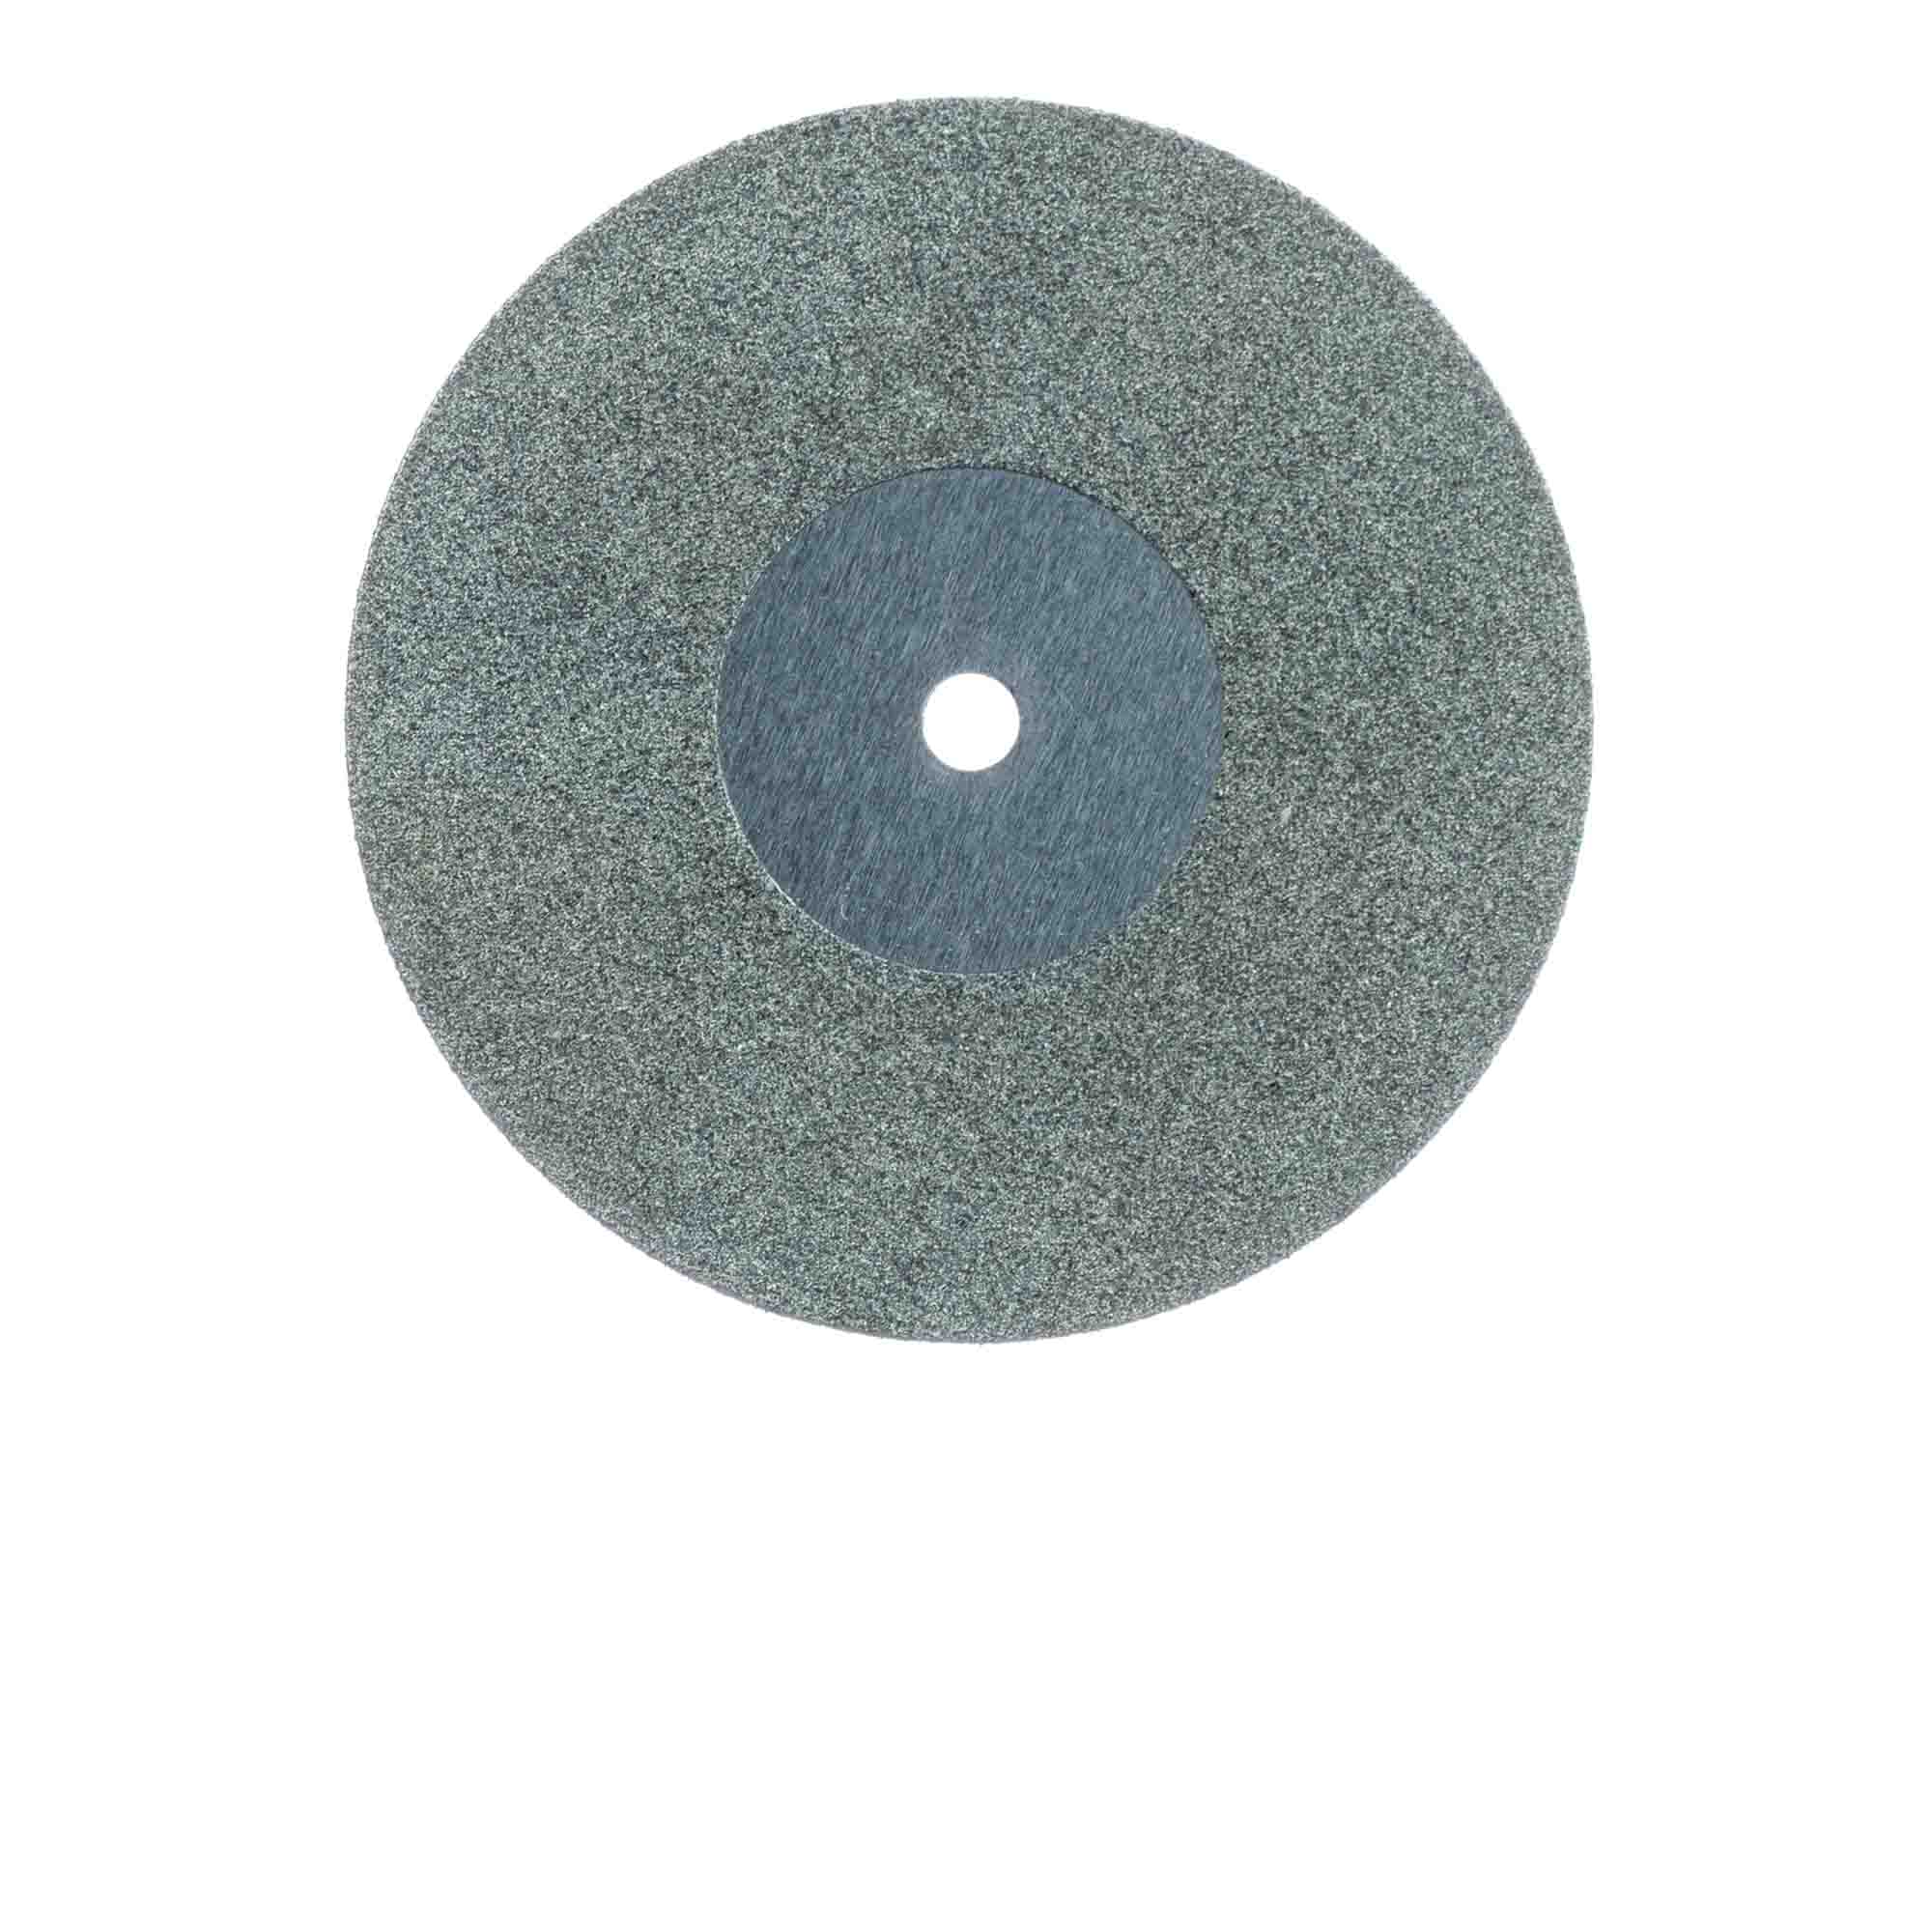 930DF-220-UNM Diamond Disc, Double Sided, 0.25mm Thick, 22mm Ø, Fine, UNM